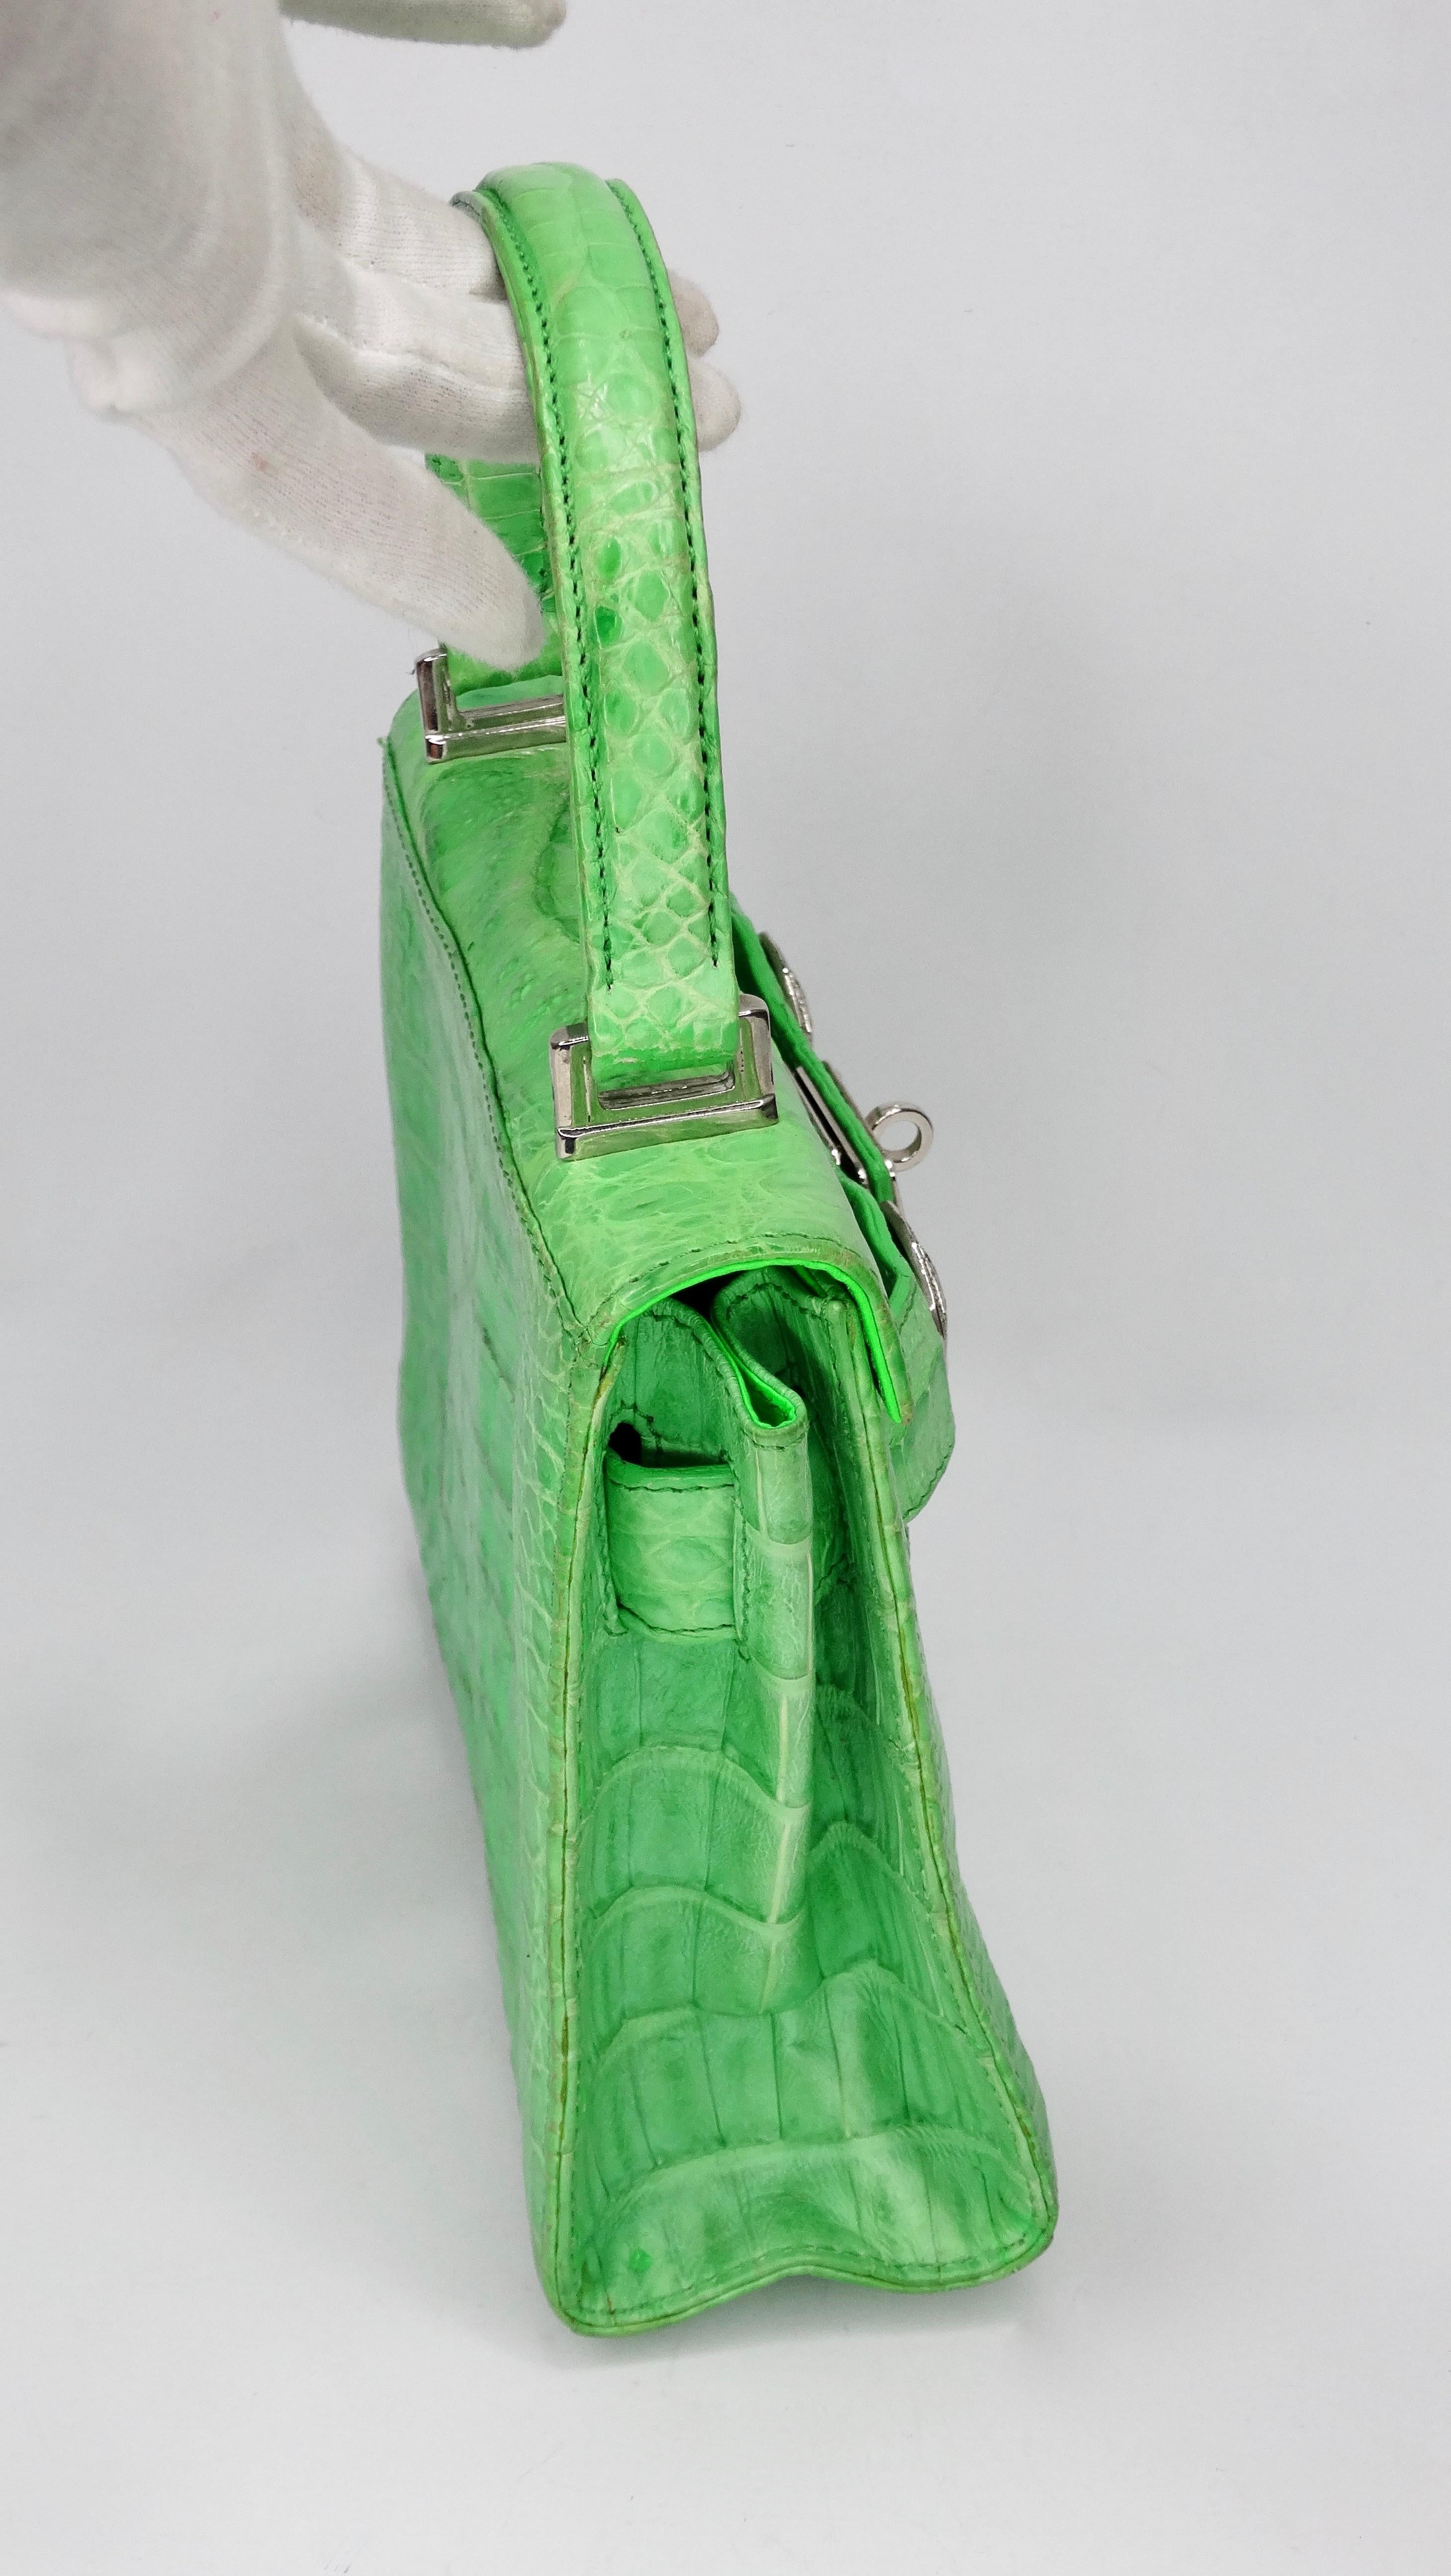 Accessorize in style with this Gianni Versace bag! Circa 1990s, this mini handbag is crafted from crocodile with a lime green finish and features a single flat top handle, silver hardware, a detachable shoulder strap and a Hermes Kelly style front